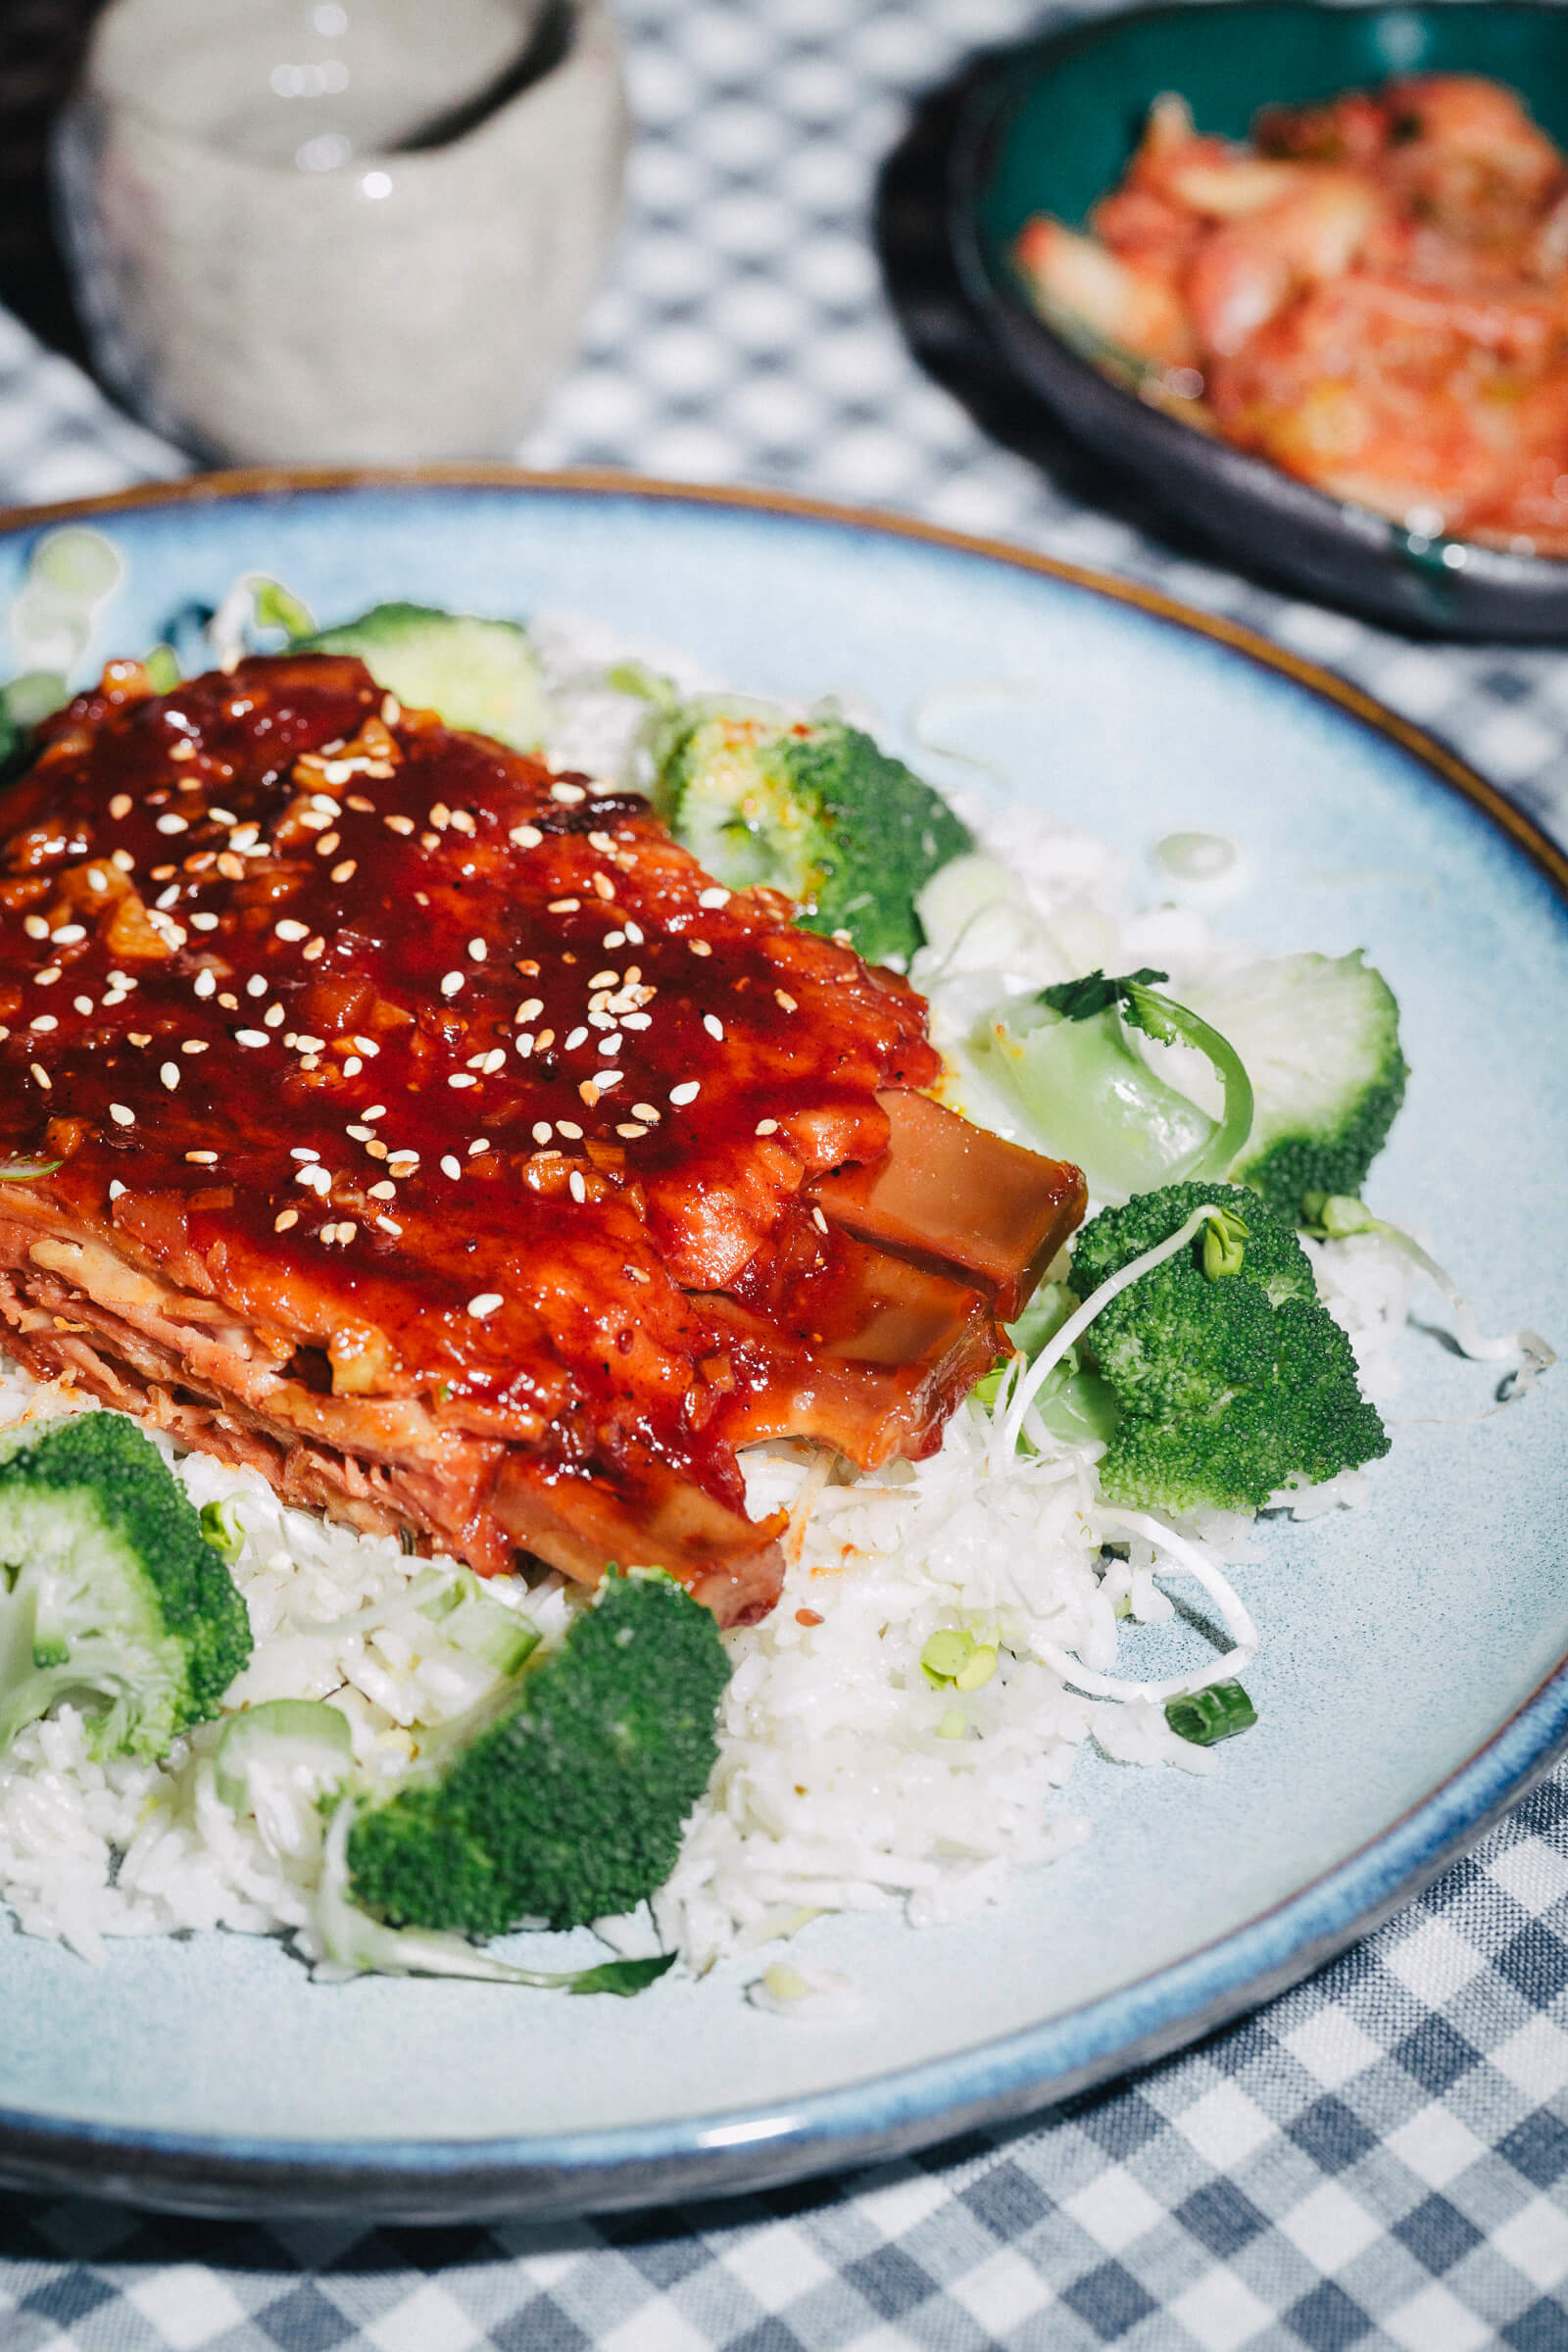 Chinese Take-Out Style Ribs